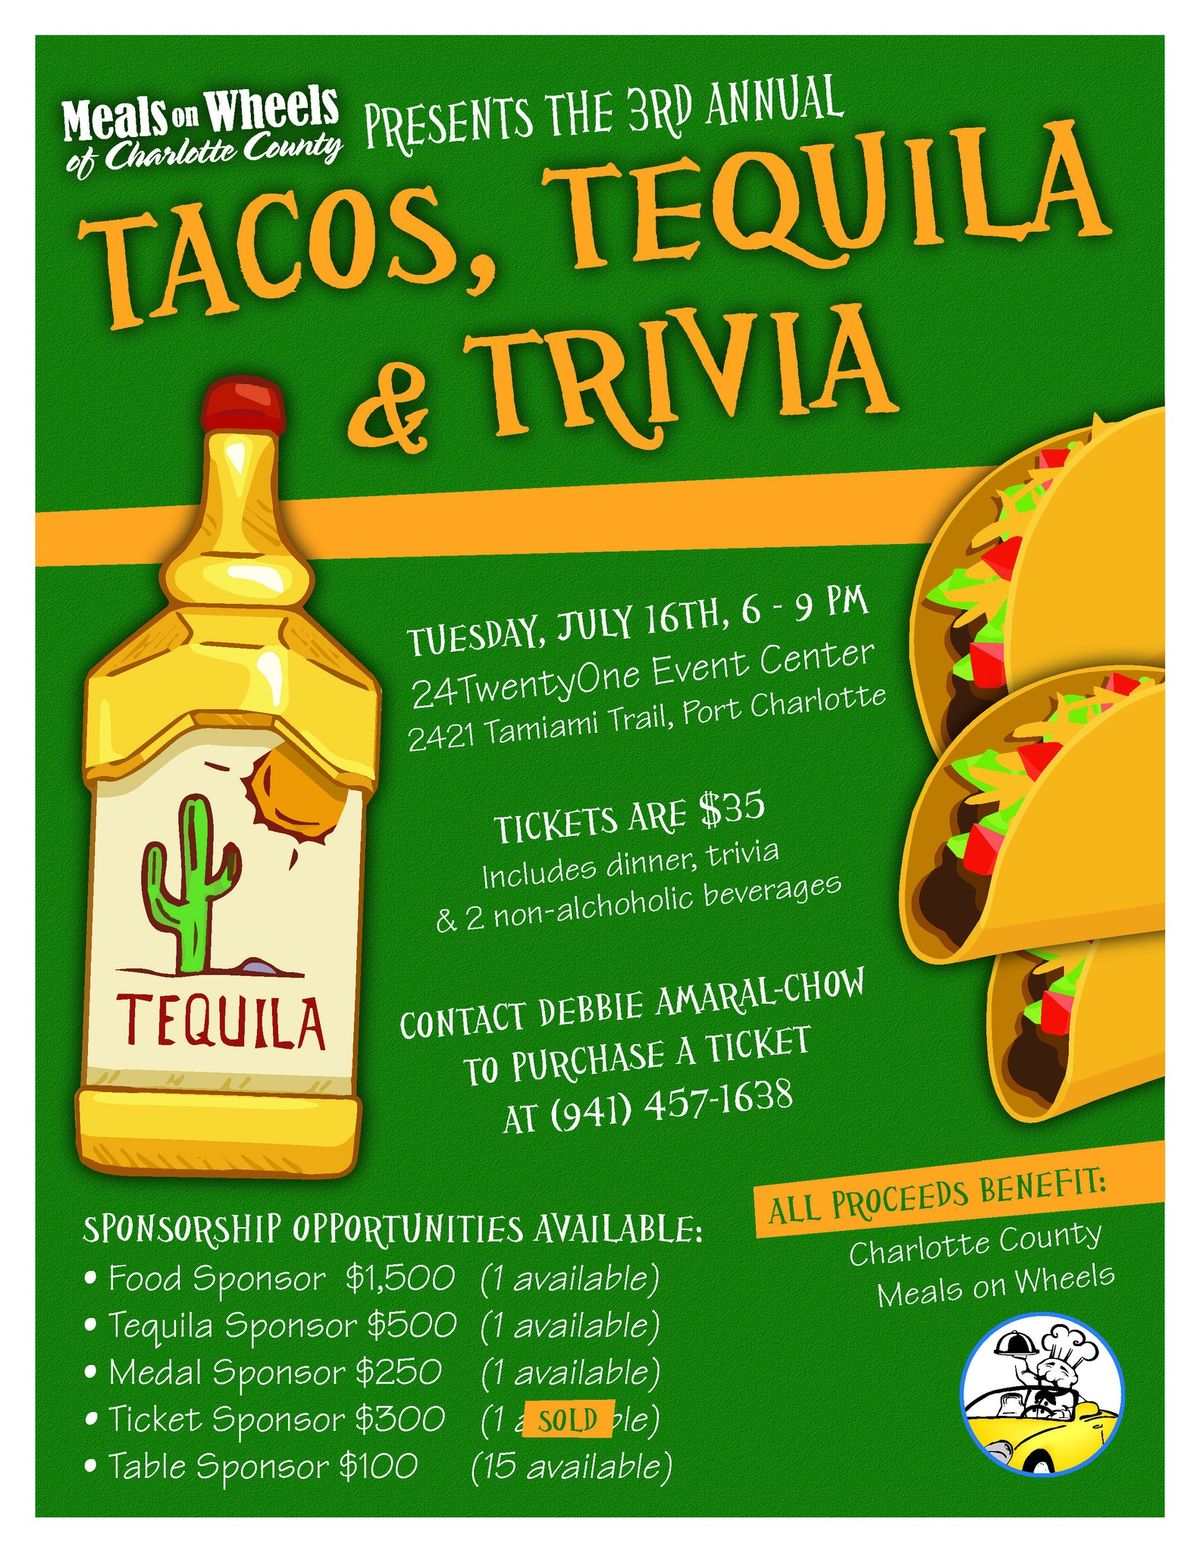 3rd Annual Tacos, Tequila & Trivia